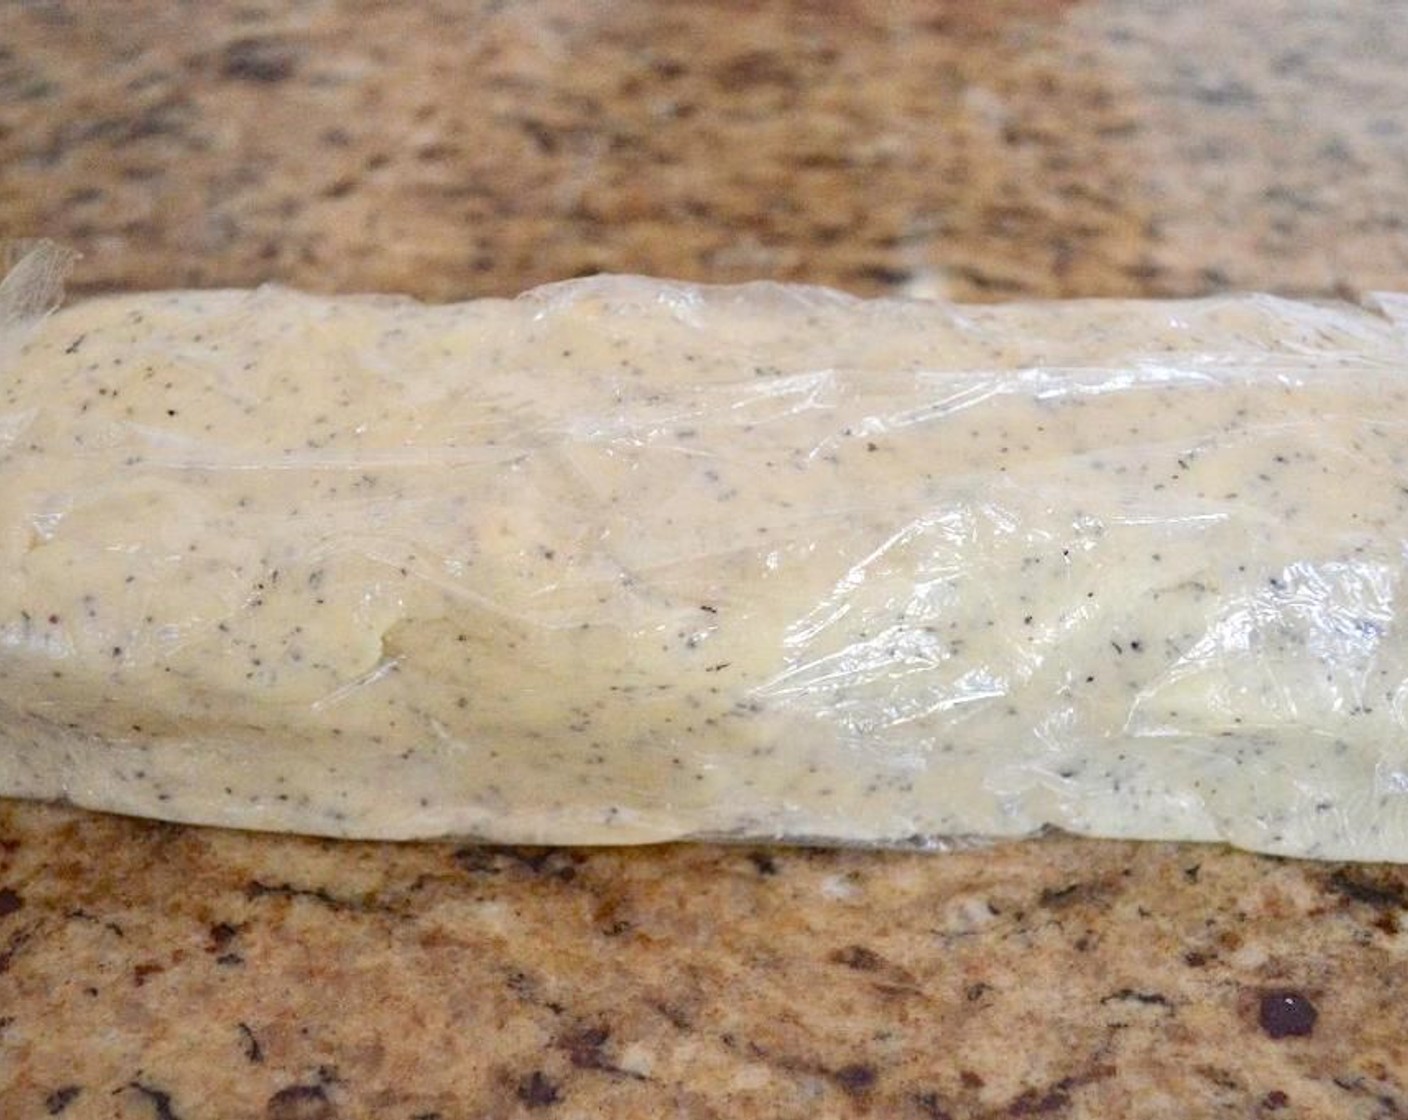 step 3 Turn the dough out onto a big sheet of plastic wrap and form it into a long rectangle about 2 inches in height. Wrap it up and set it in the refrigerator to chill for an hour. This will make the dough easier to slice and the butter cold when it hits the oven.